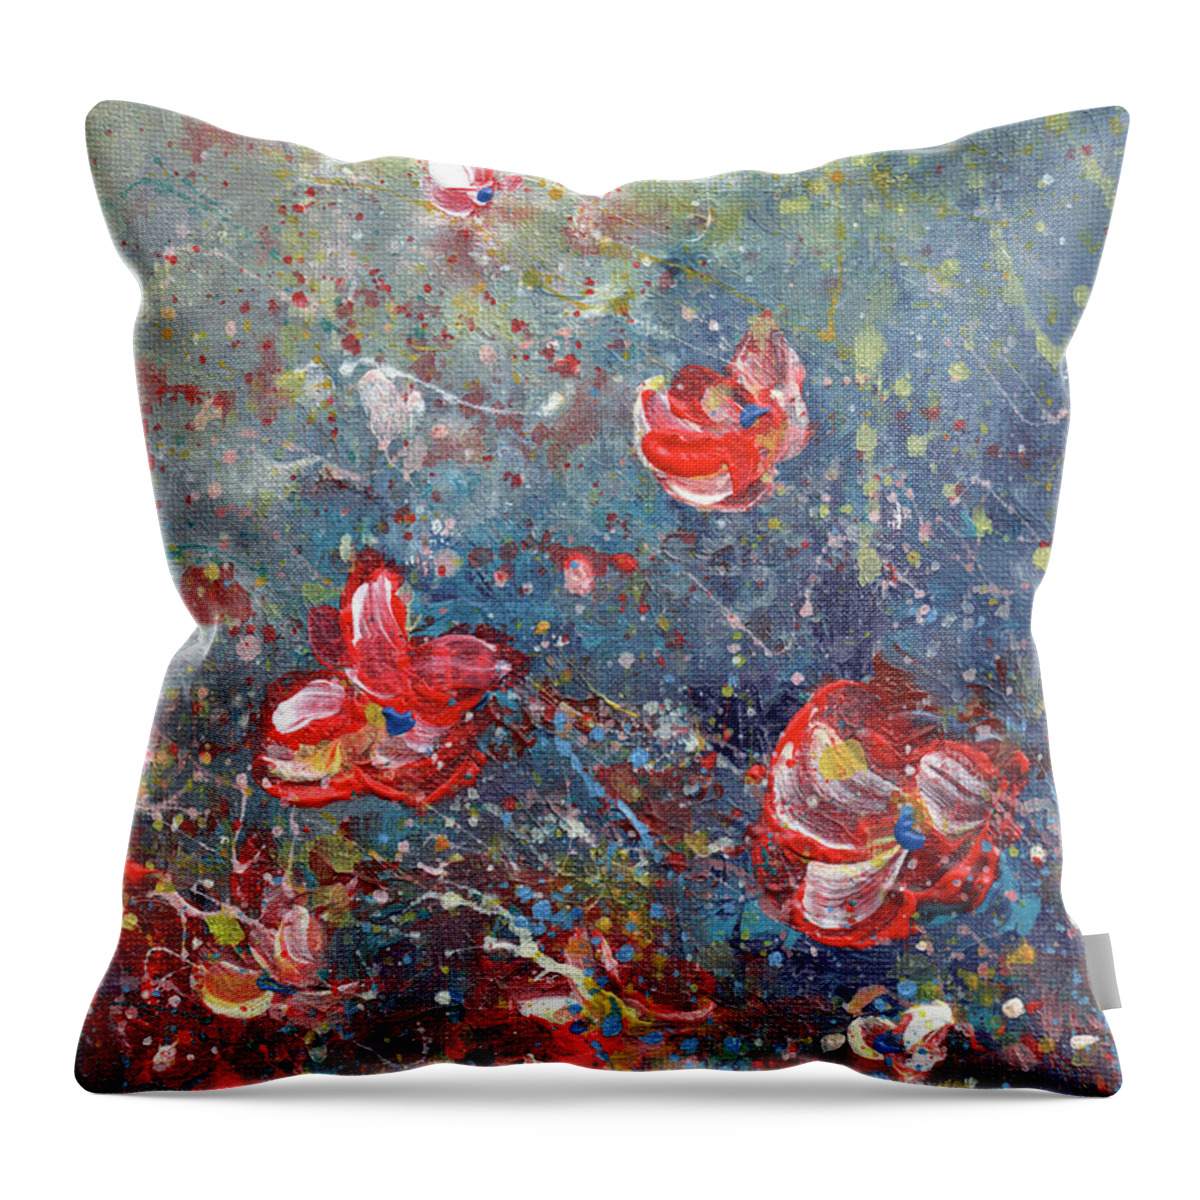 Abstract Throw Pillow featuring the painting Petal Rain 05 by Miki De Goodaboom